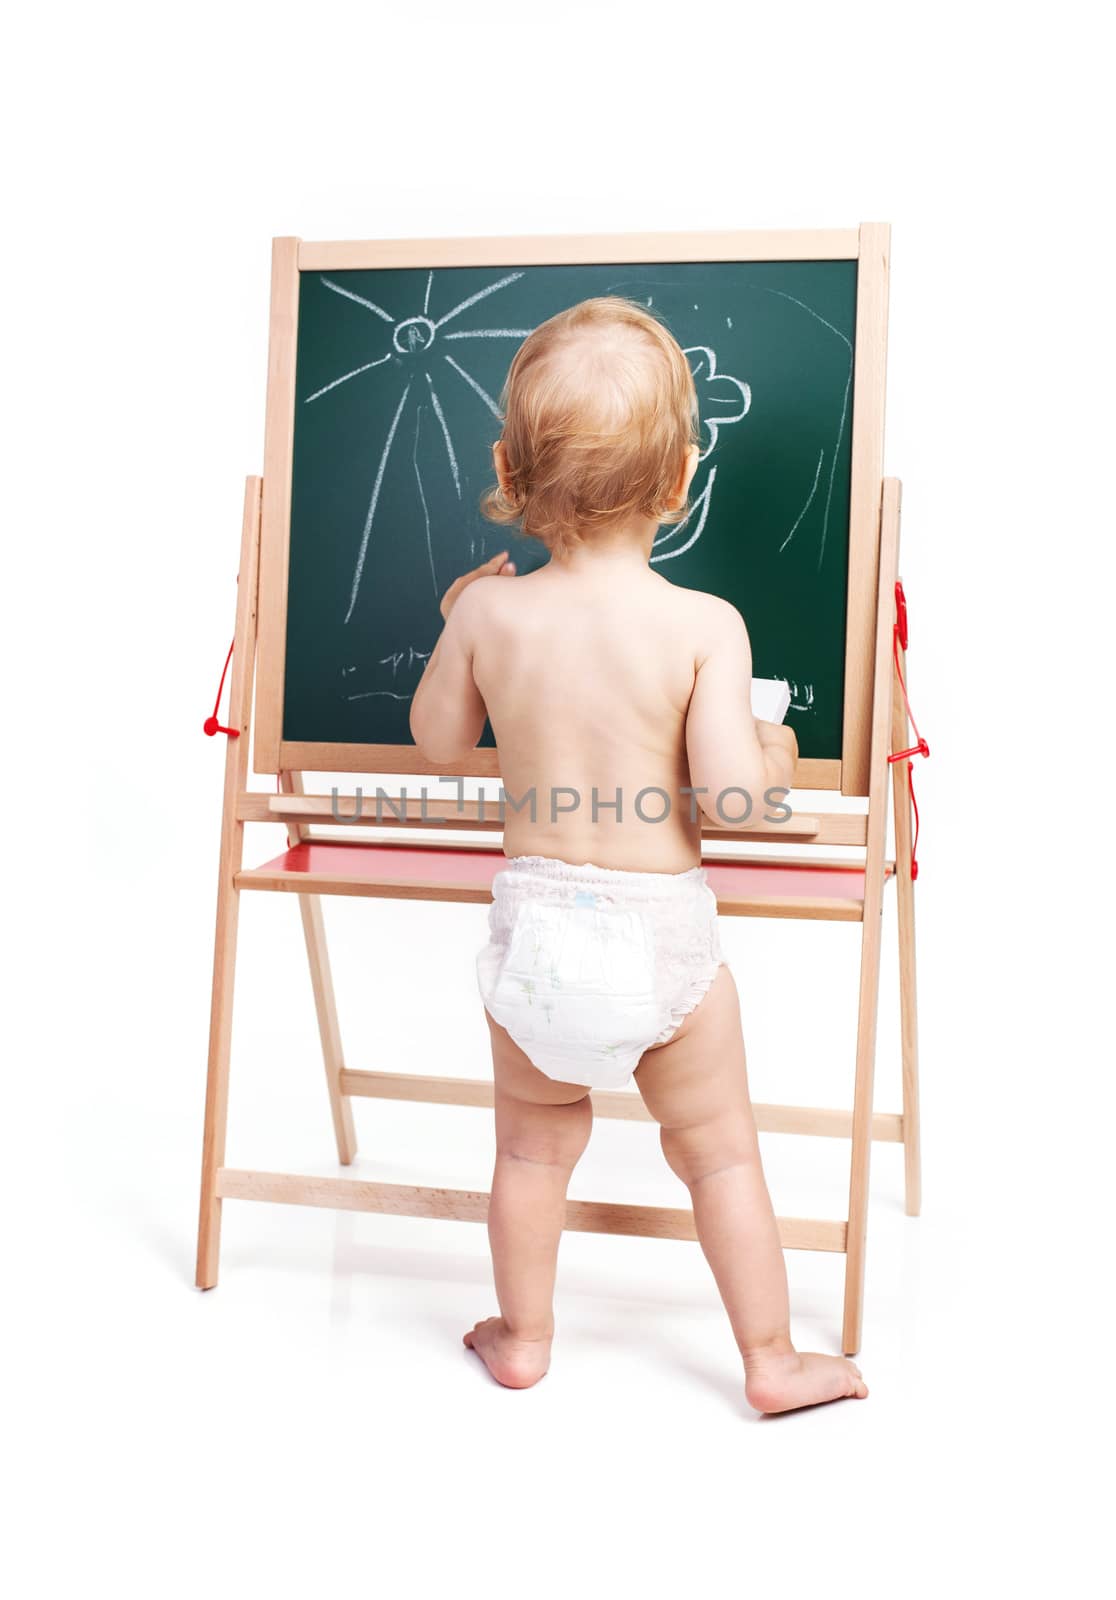 Baby boy drawing on chalkboard over white by photobac